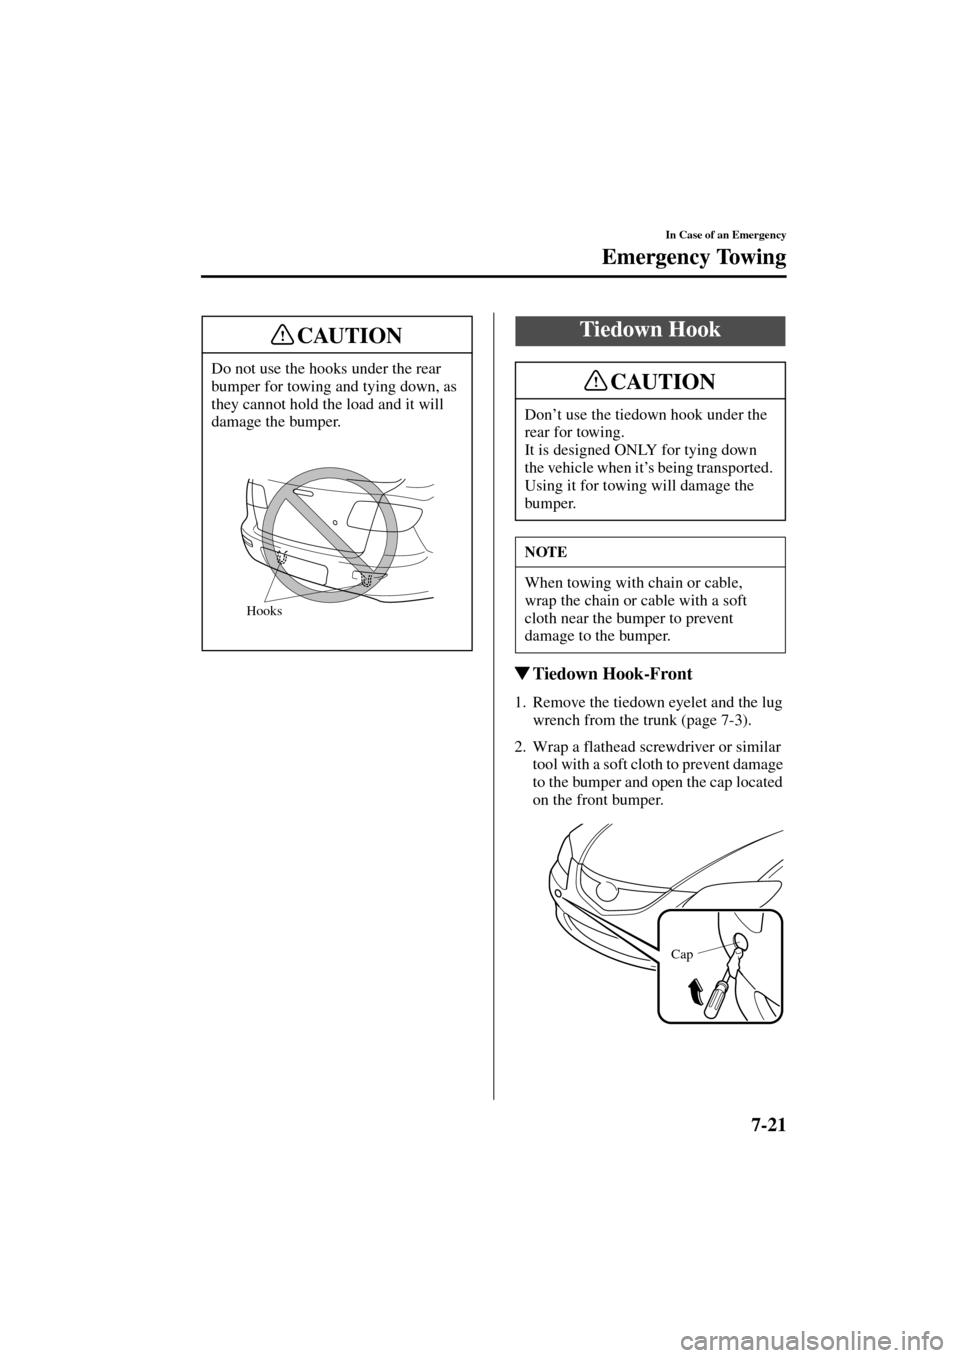 MAZDA MODEL 3 HATCHBACK 2004  Owners Manual (in English) 7-21
In Case of an Emergency
Emergency Towing
Form No. 8S18-EA-03I
Tiedown Hook-Front
1. Remove the tiedown eyelet and the lug 
wrench from the trunk (page 7-3).
2. Wrap a flathead screwdriver or sim